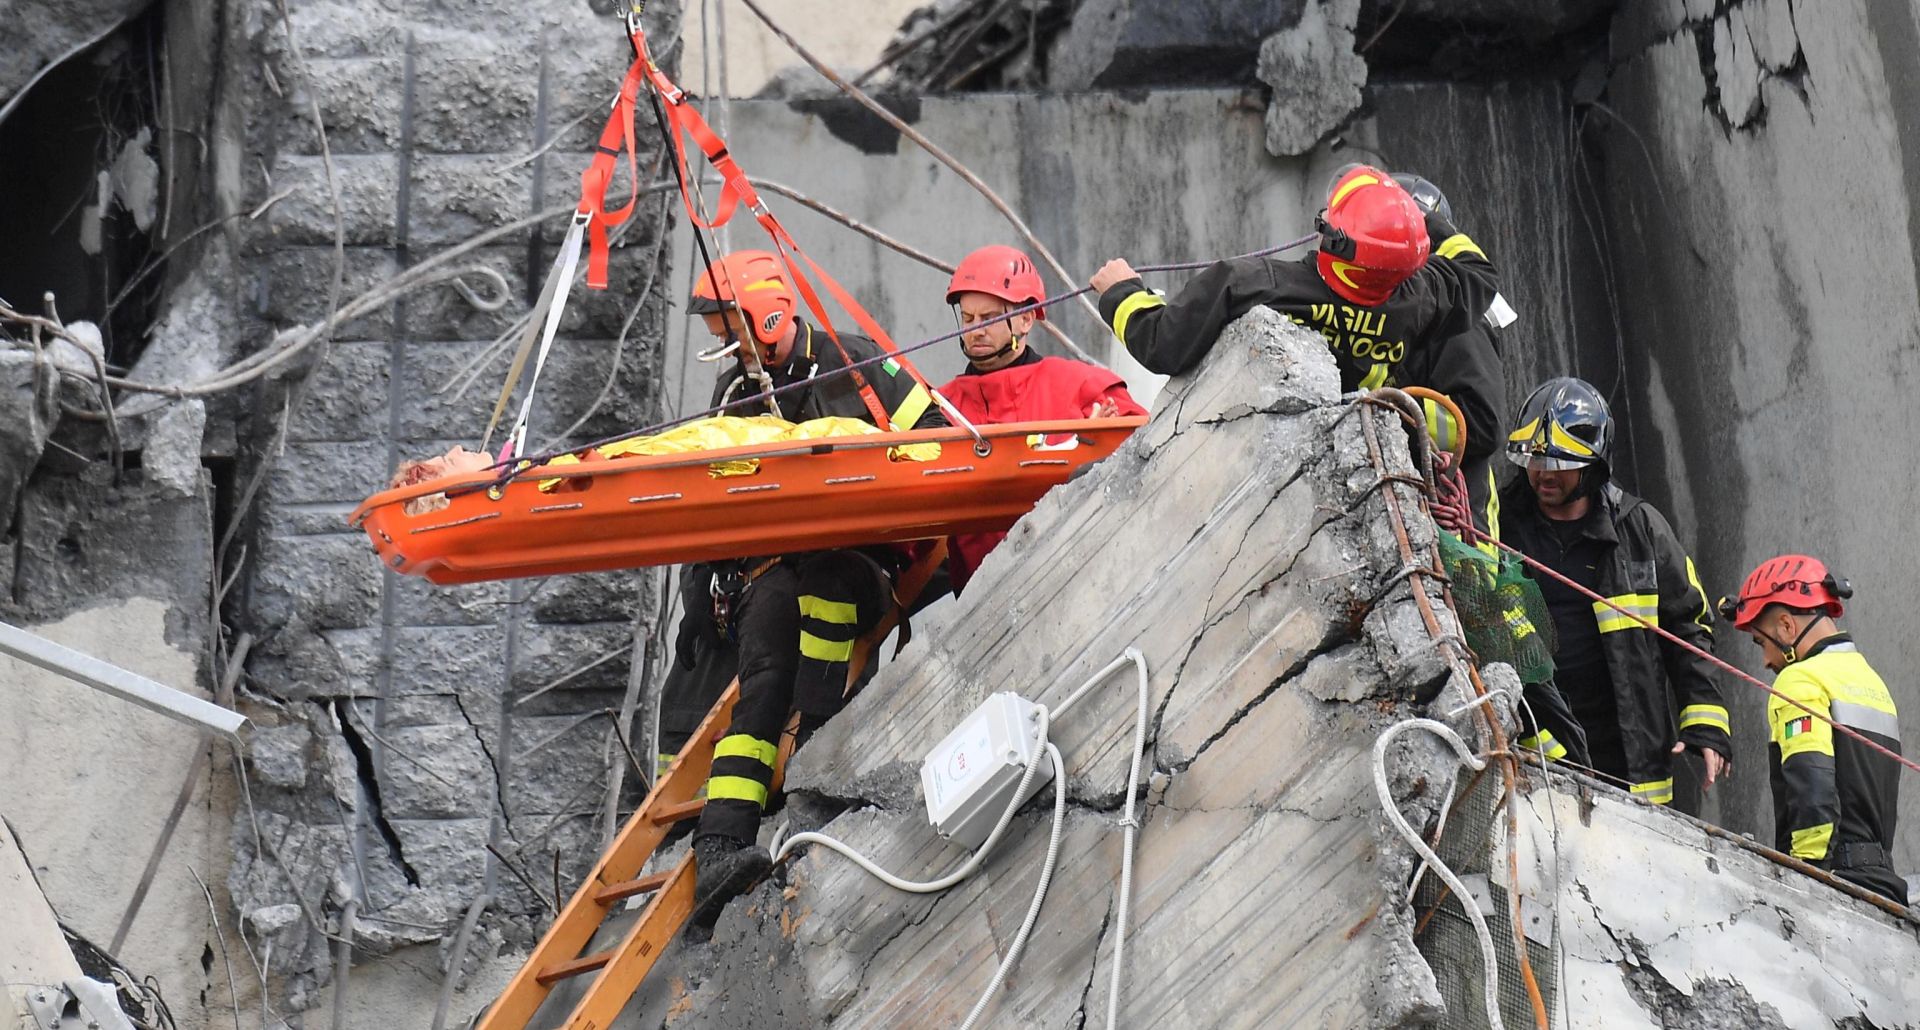 epa06949717 Rescuers recover an injured person after a highway bridge collapsed in Genoa, Italy, 14 August 2018. At least 22 people are believed to have died as a large section of the Morandi viaduct upon which the A10 motorway runs collapsed in Genoa on Tuesday. Both sides of the highway fell. Around 10 vehicles are involved in the collapse, rescue sources said. The viaduct gave way amid torrential rain.  EPA/LUCA ZENNARO